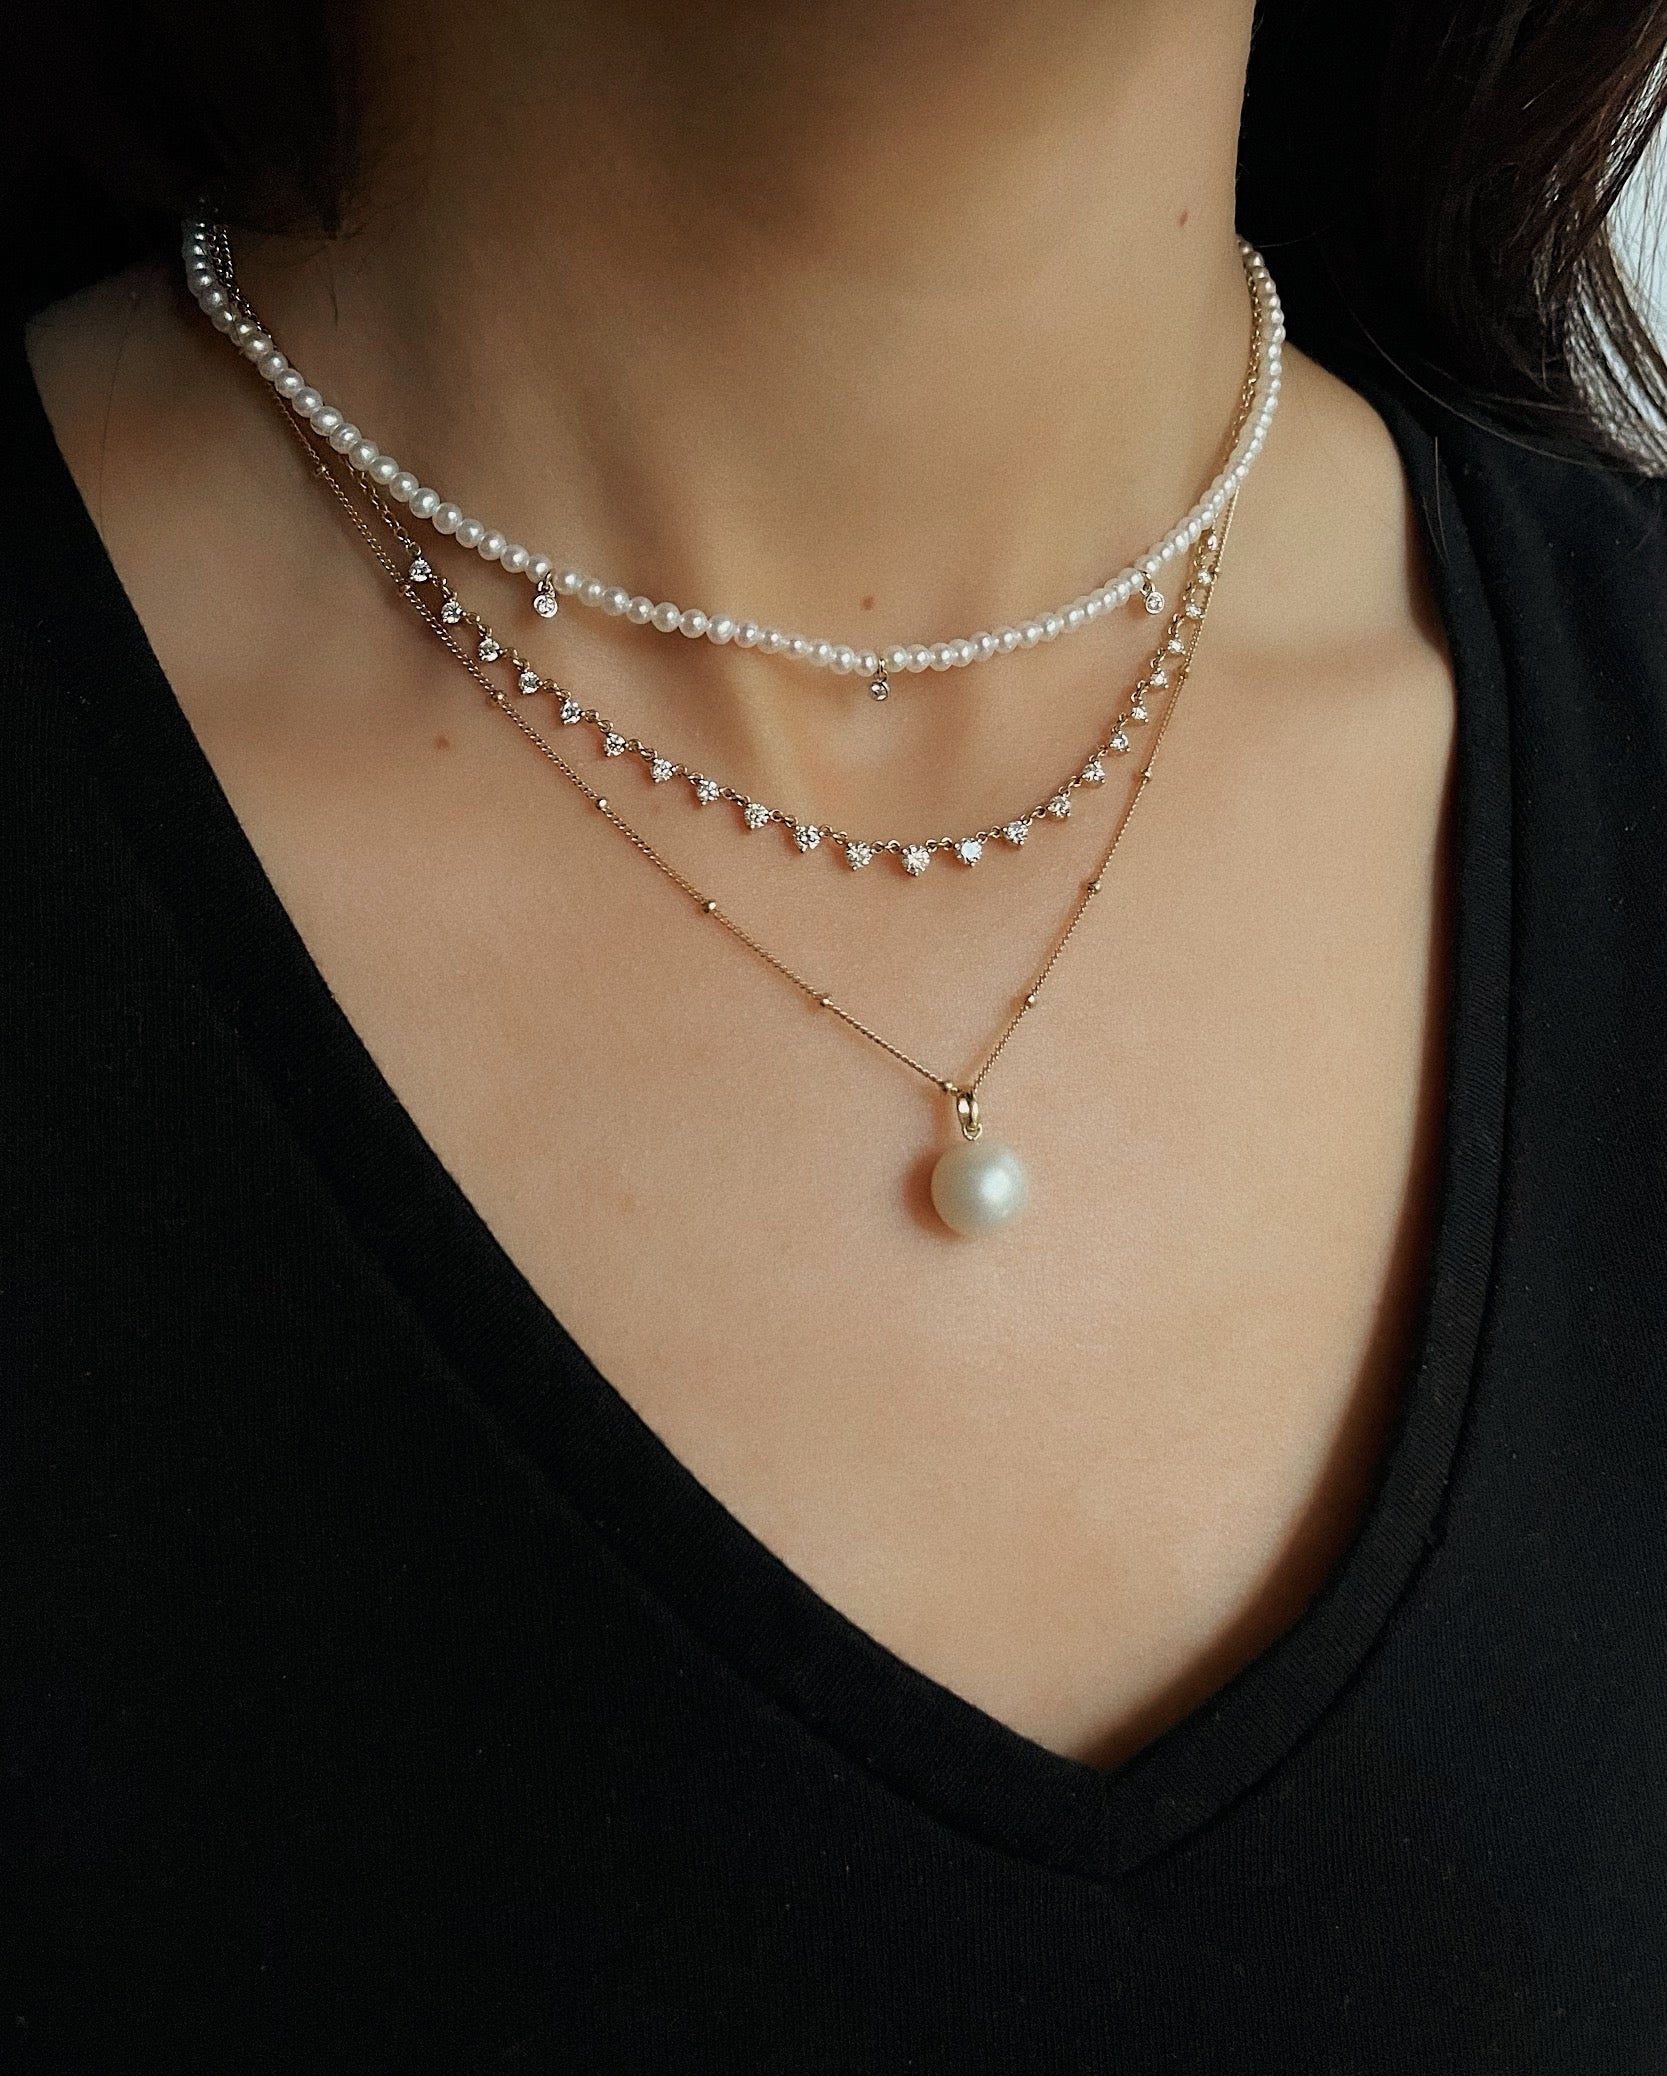 Minar Delicate Genuine Freshwater Pearl Necklaces for Women Three Layers  Irregular Pearls Beads Choker Necklace Wedding